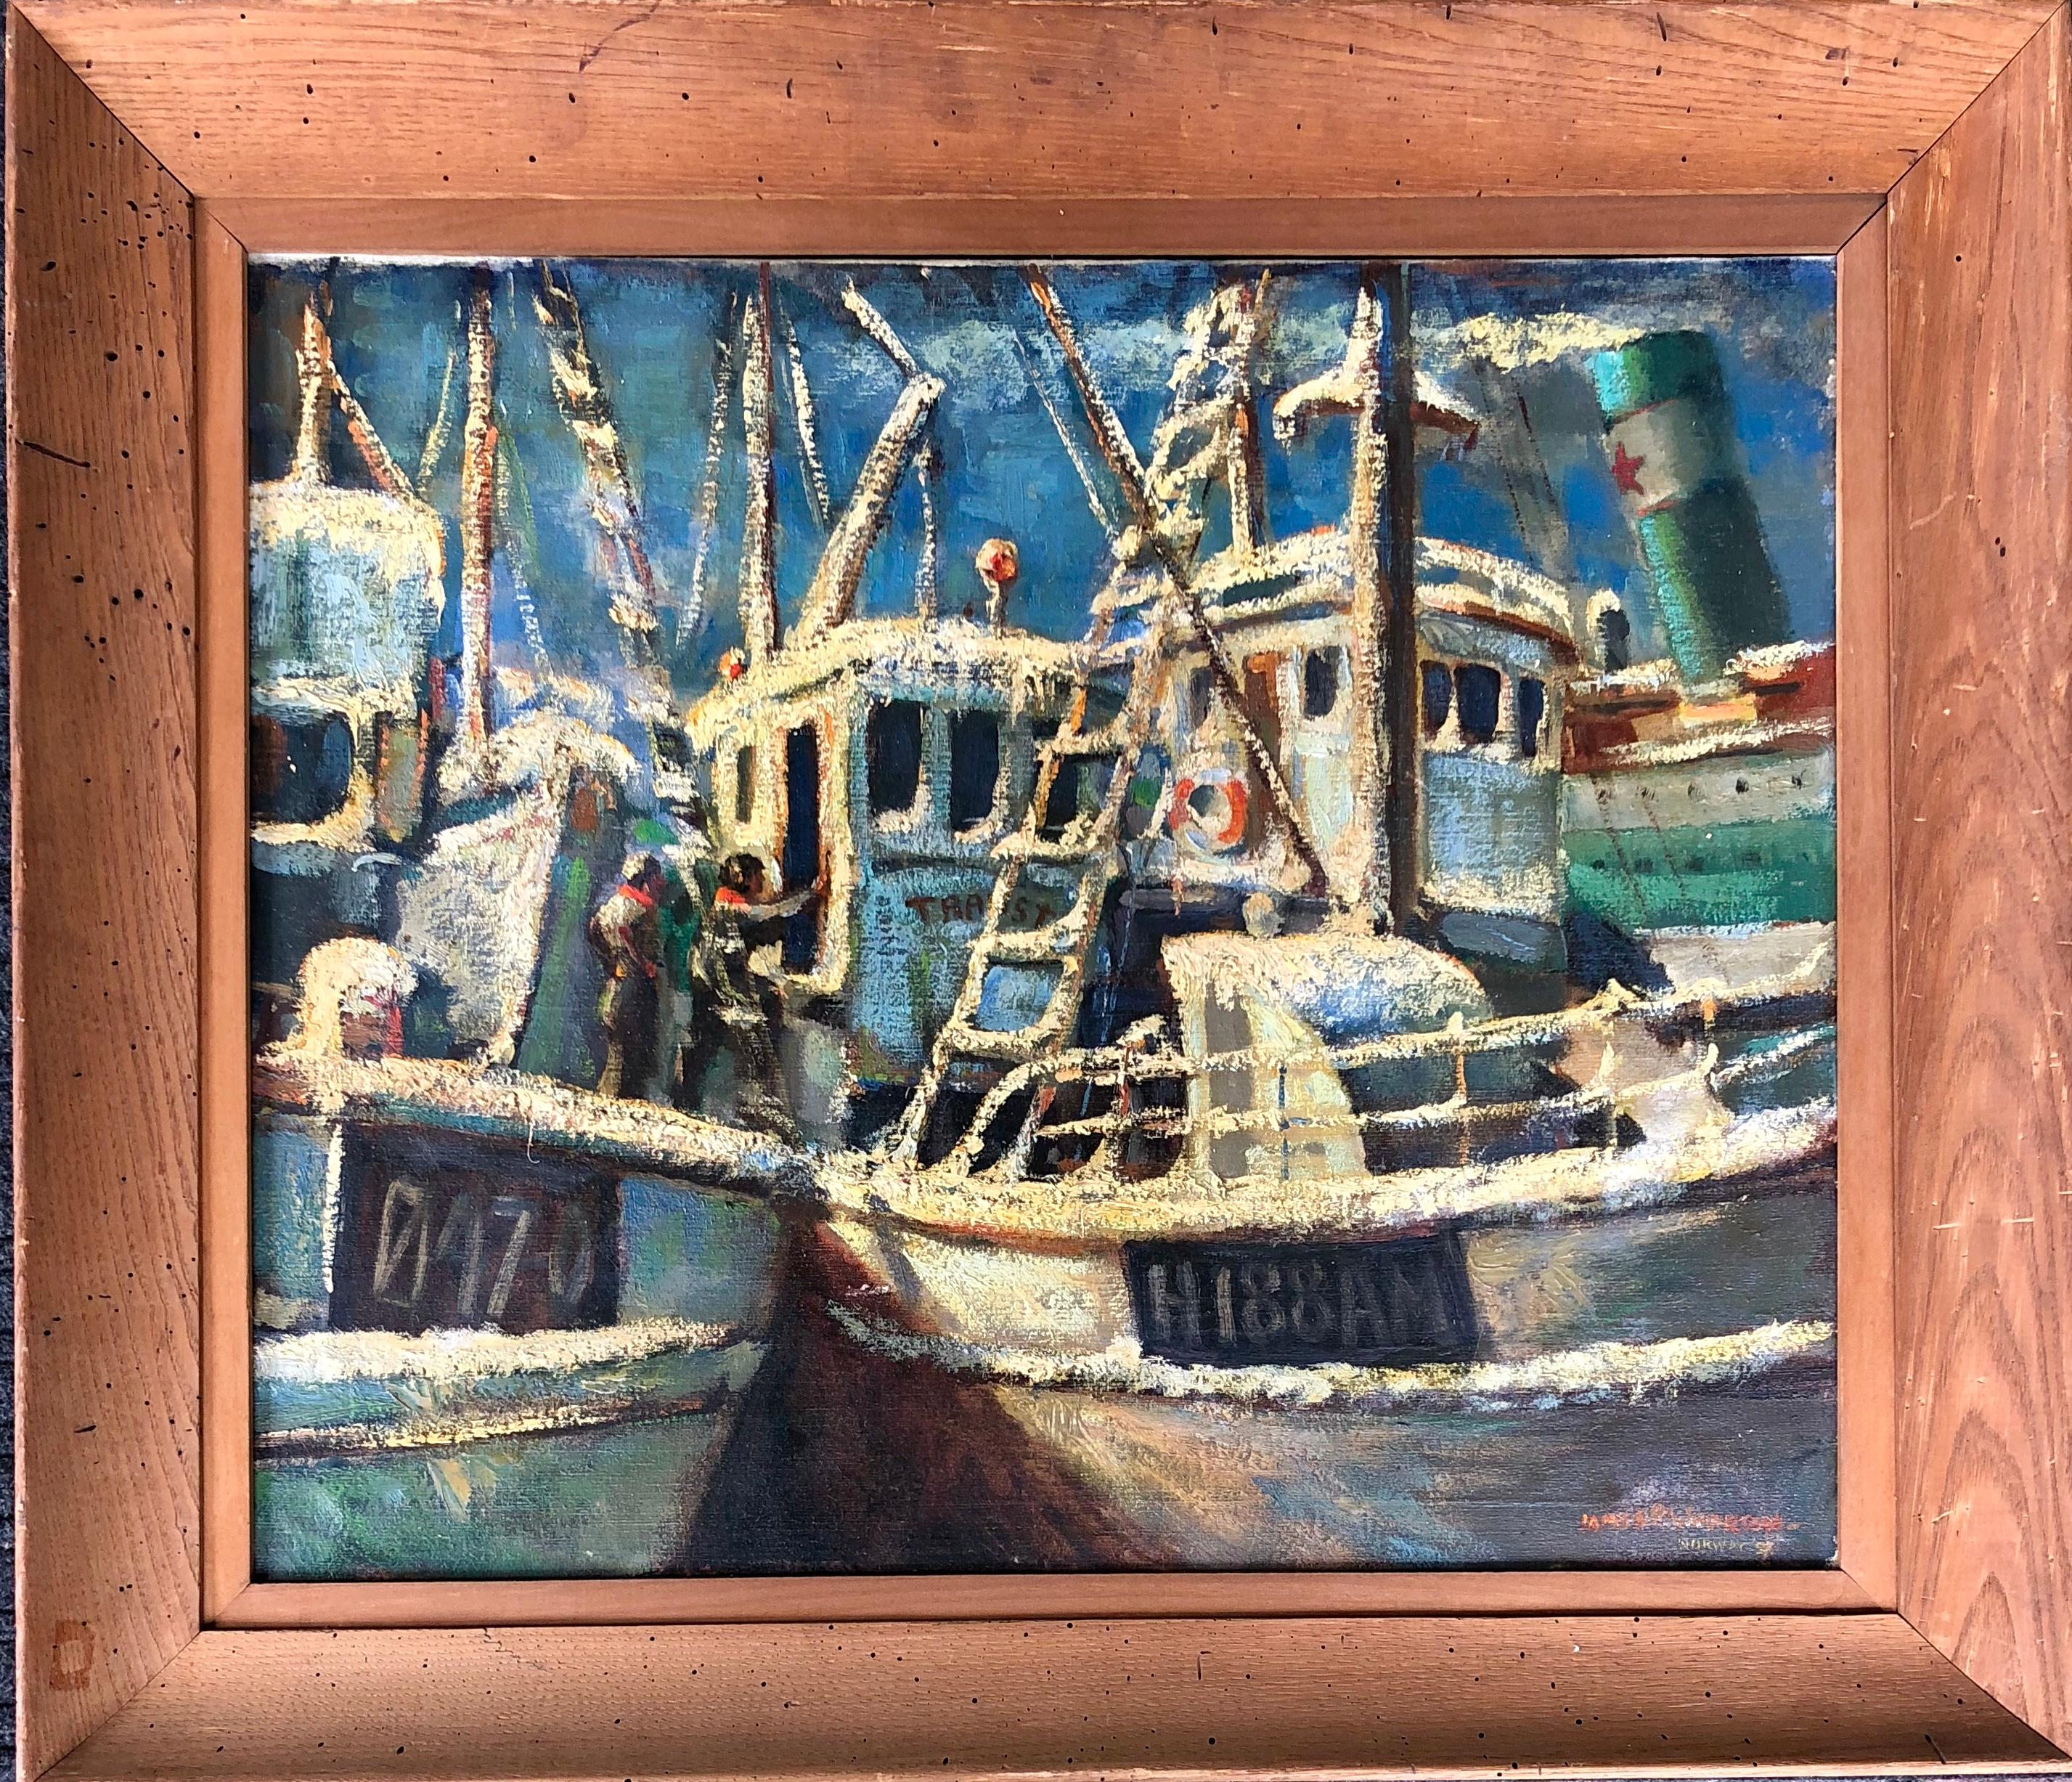 Oil on canvas signed lower right and dated 58'
Great impasto texture to the paint. This artist has works in the Smithsonian.
Old property sticker of the Maryland Student Union. 32